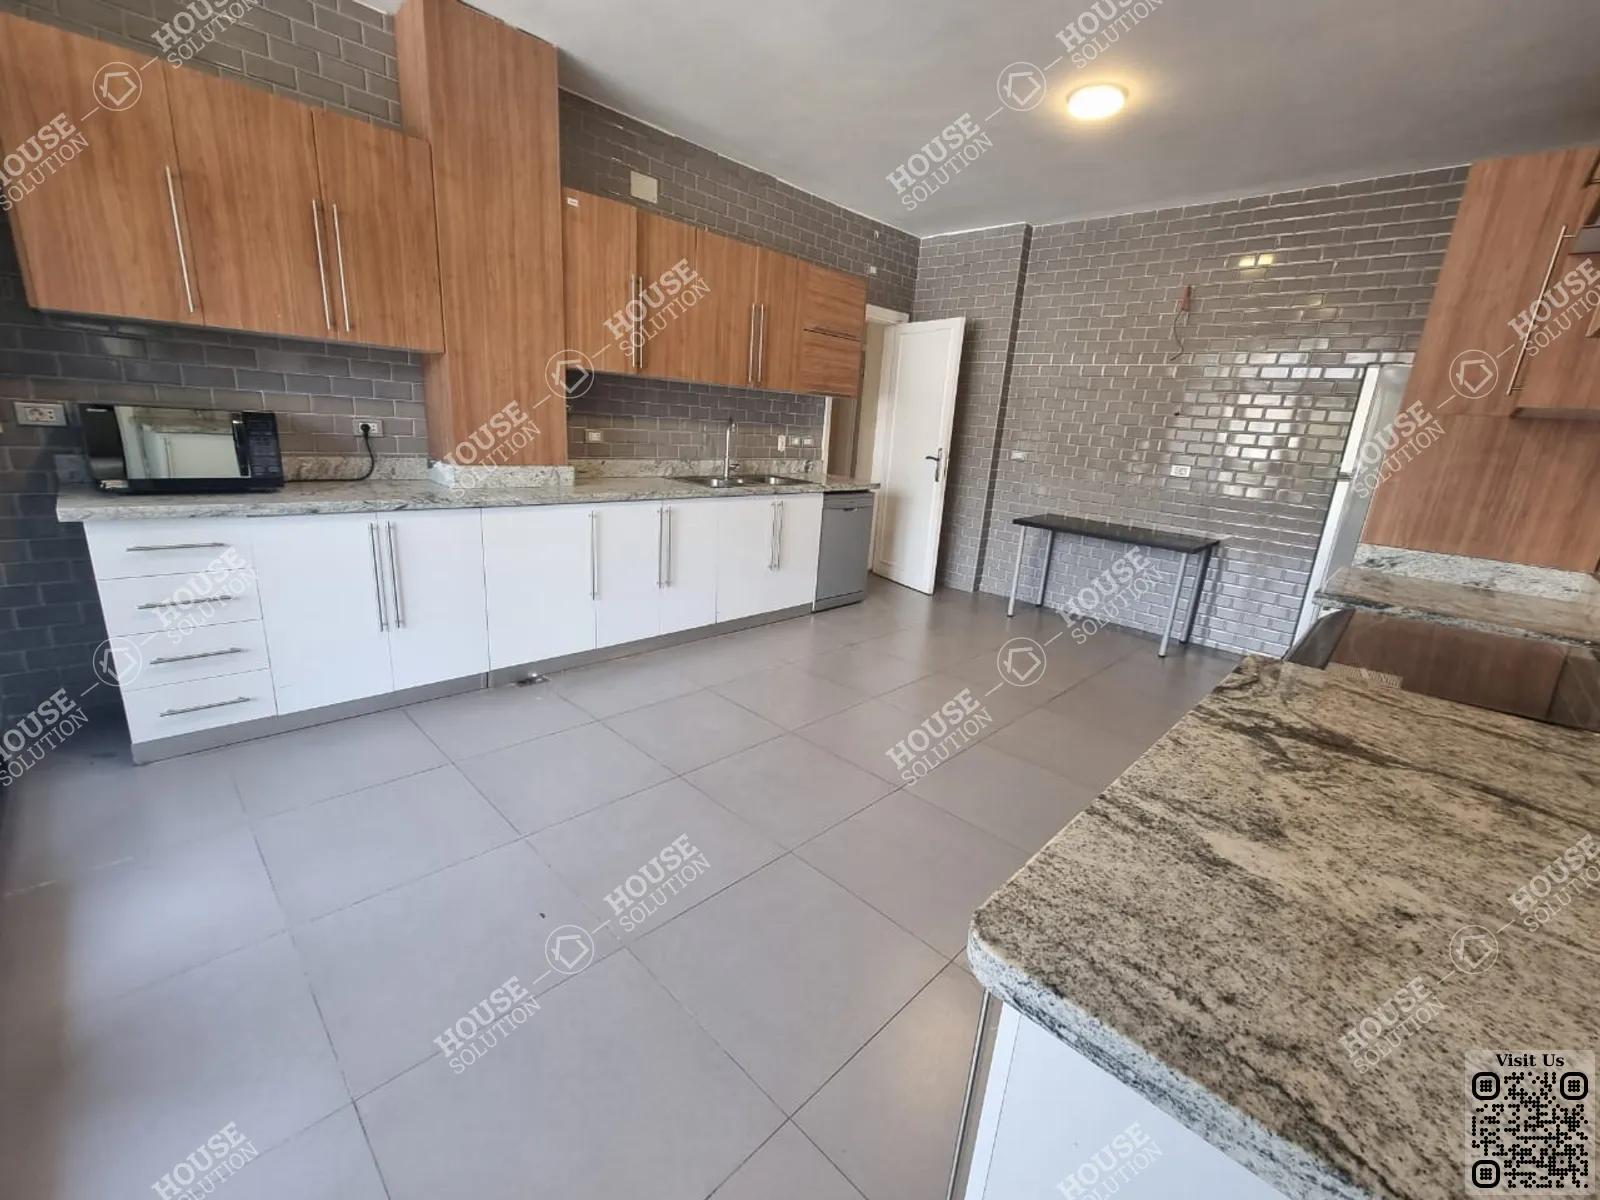 KITCHEN  @ Apartments For Rent In Maadi Maadi Sarayat Area: 320 m² consists of 4 Bedrooms 3 Bathrooms Modern furnished 5 stars #4577-1